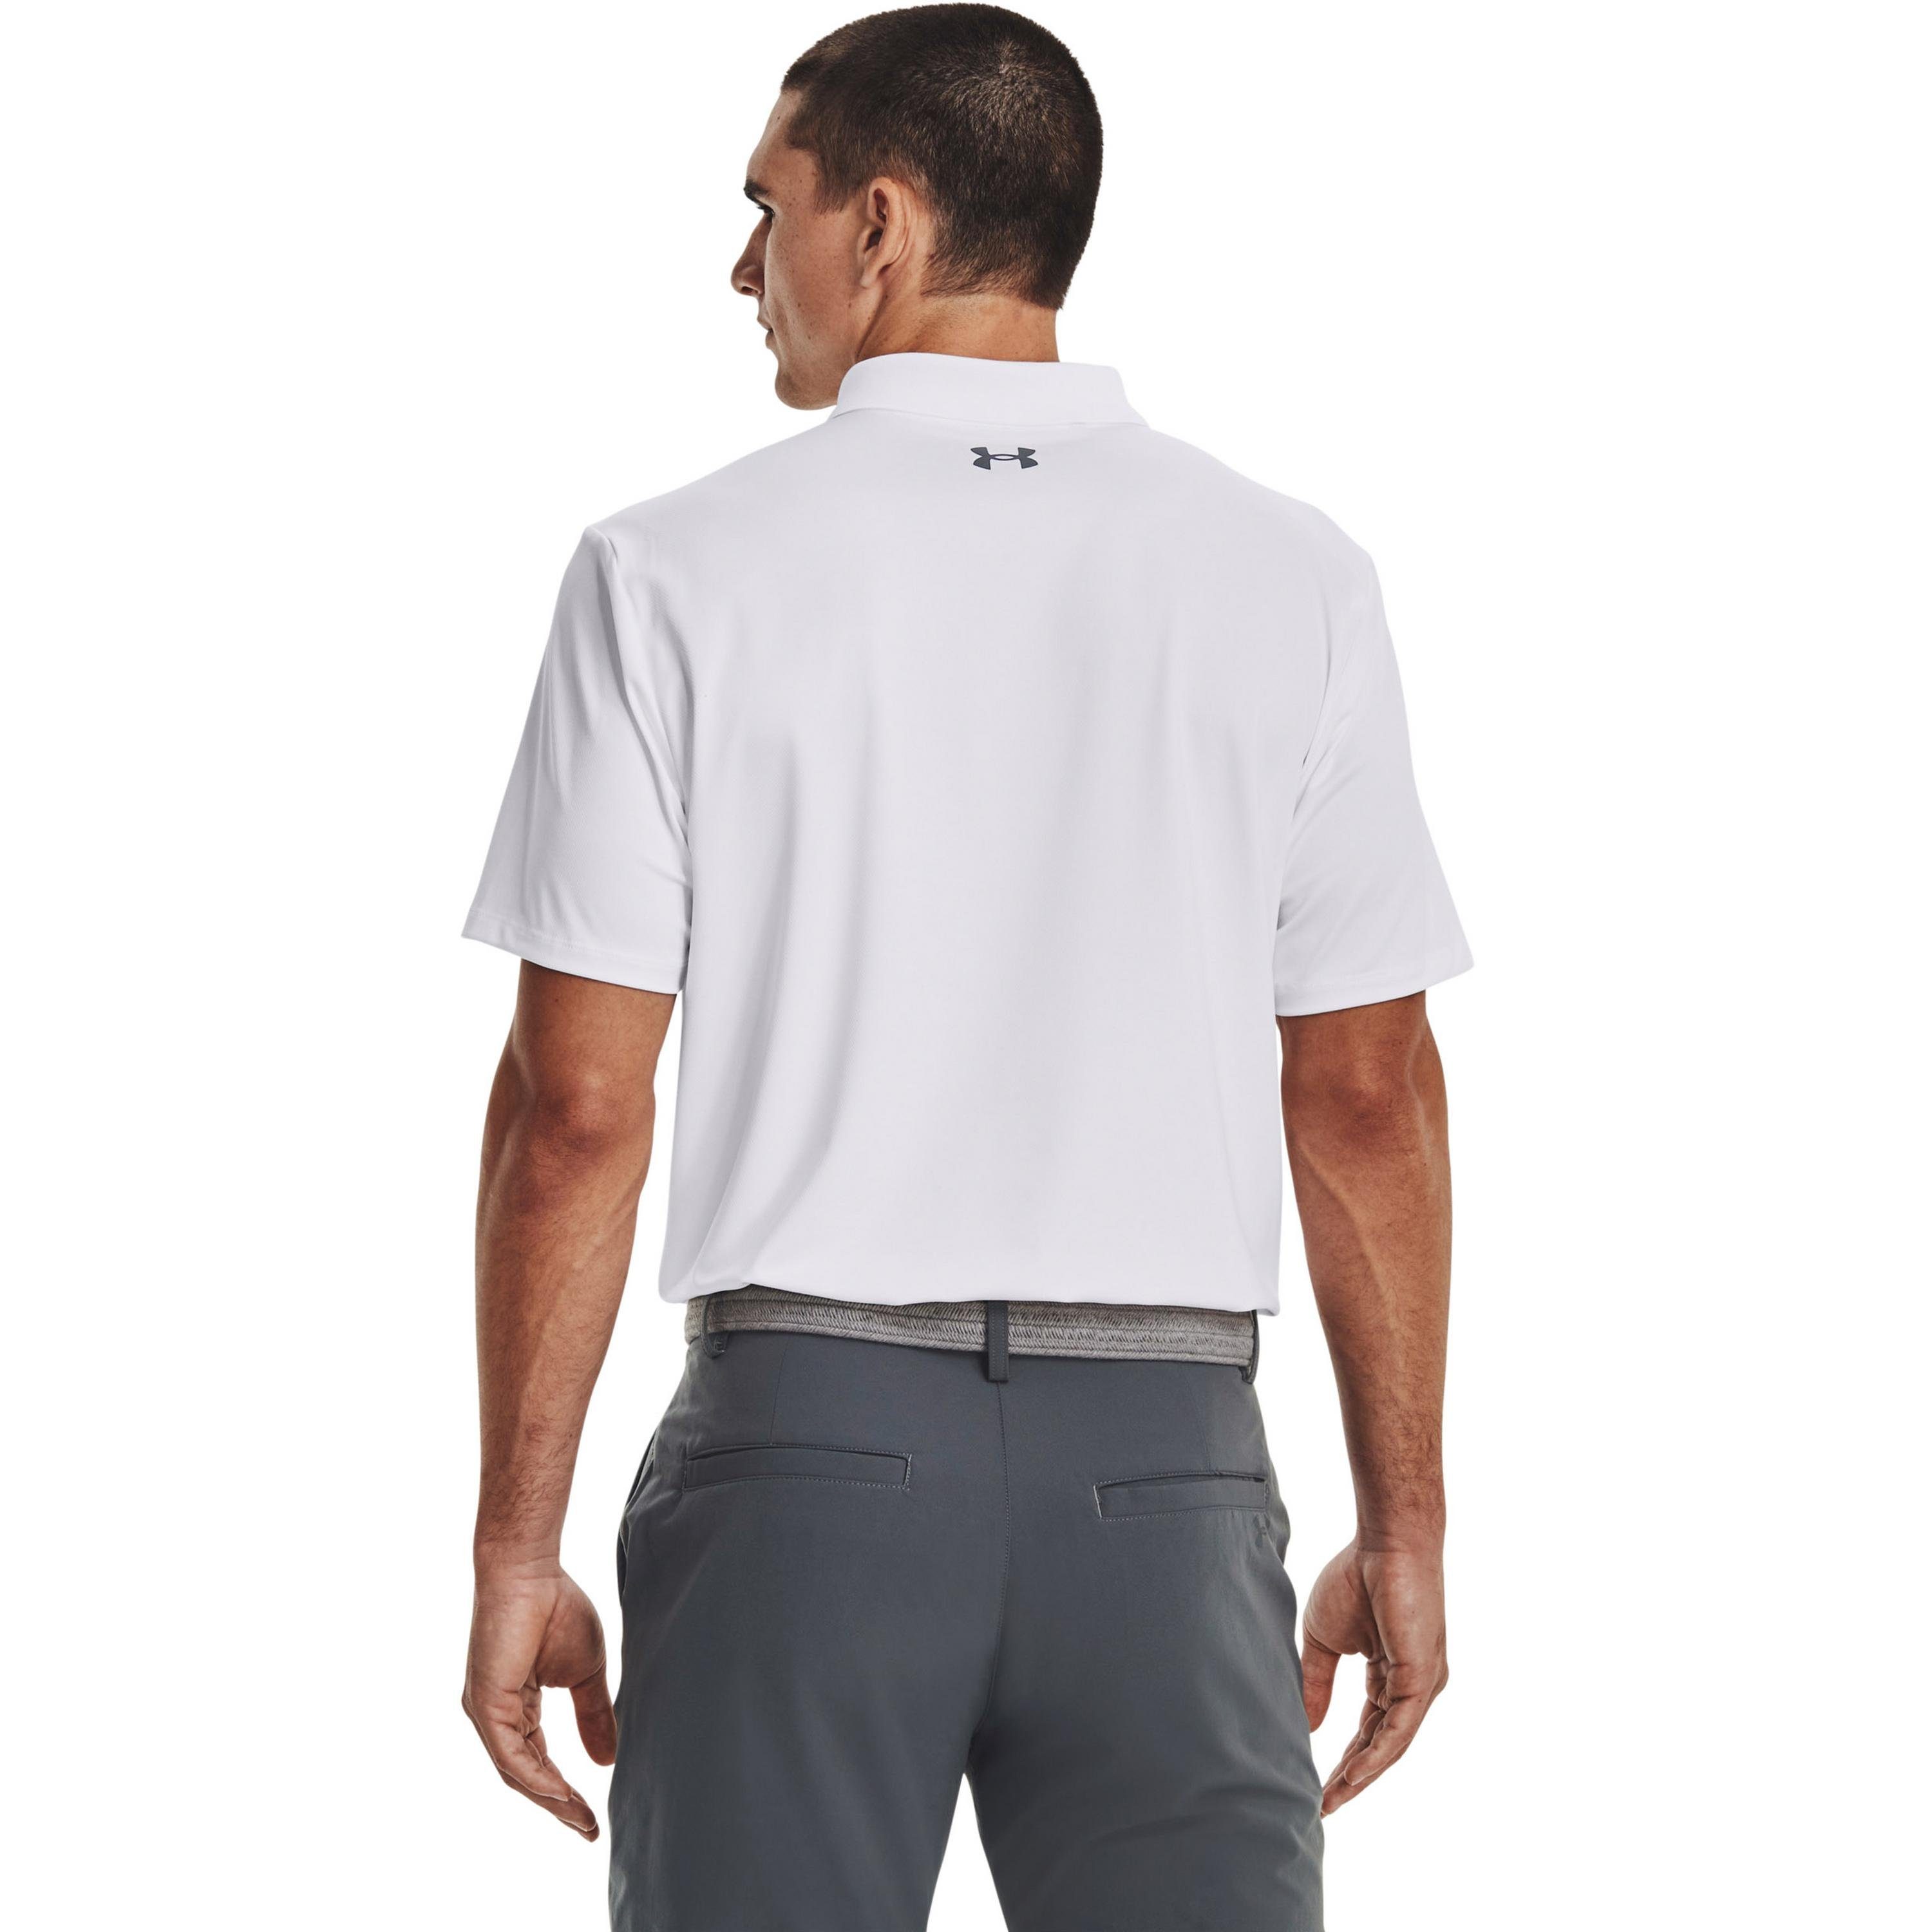 Under Armour® Poloshirt Performance white-pitch gray 3.0